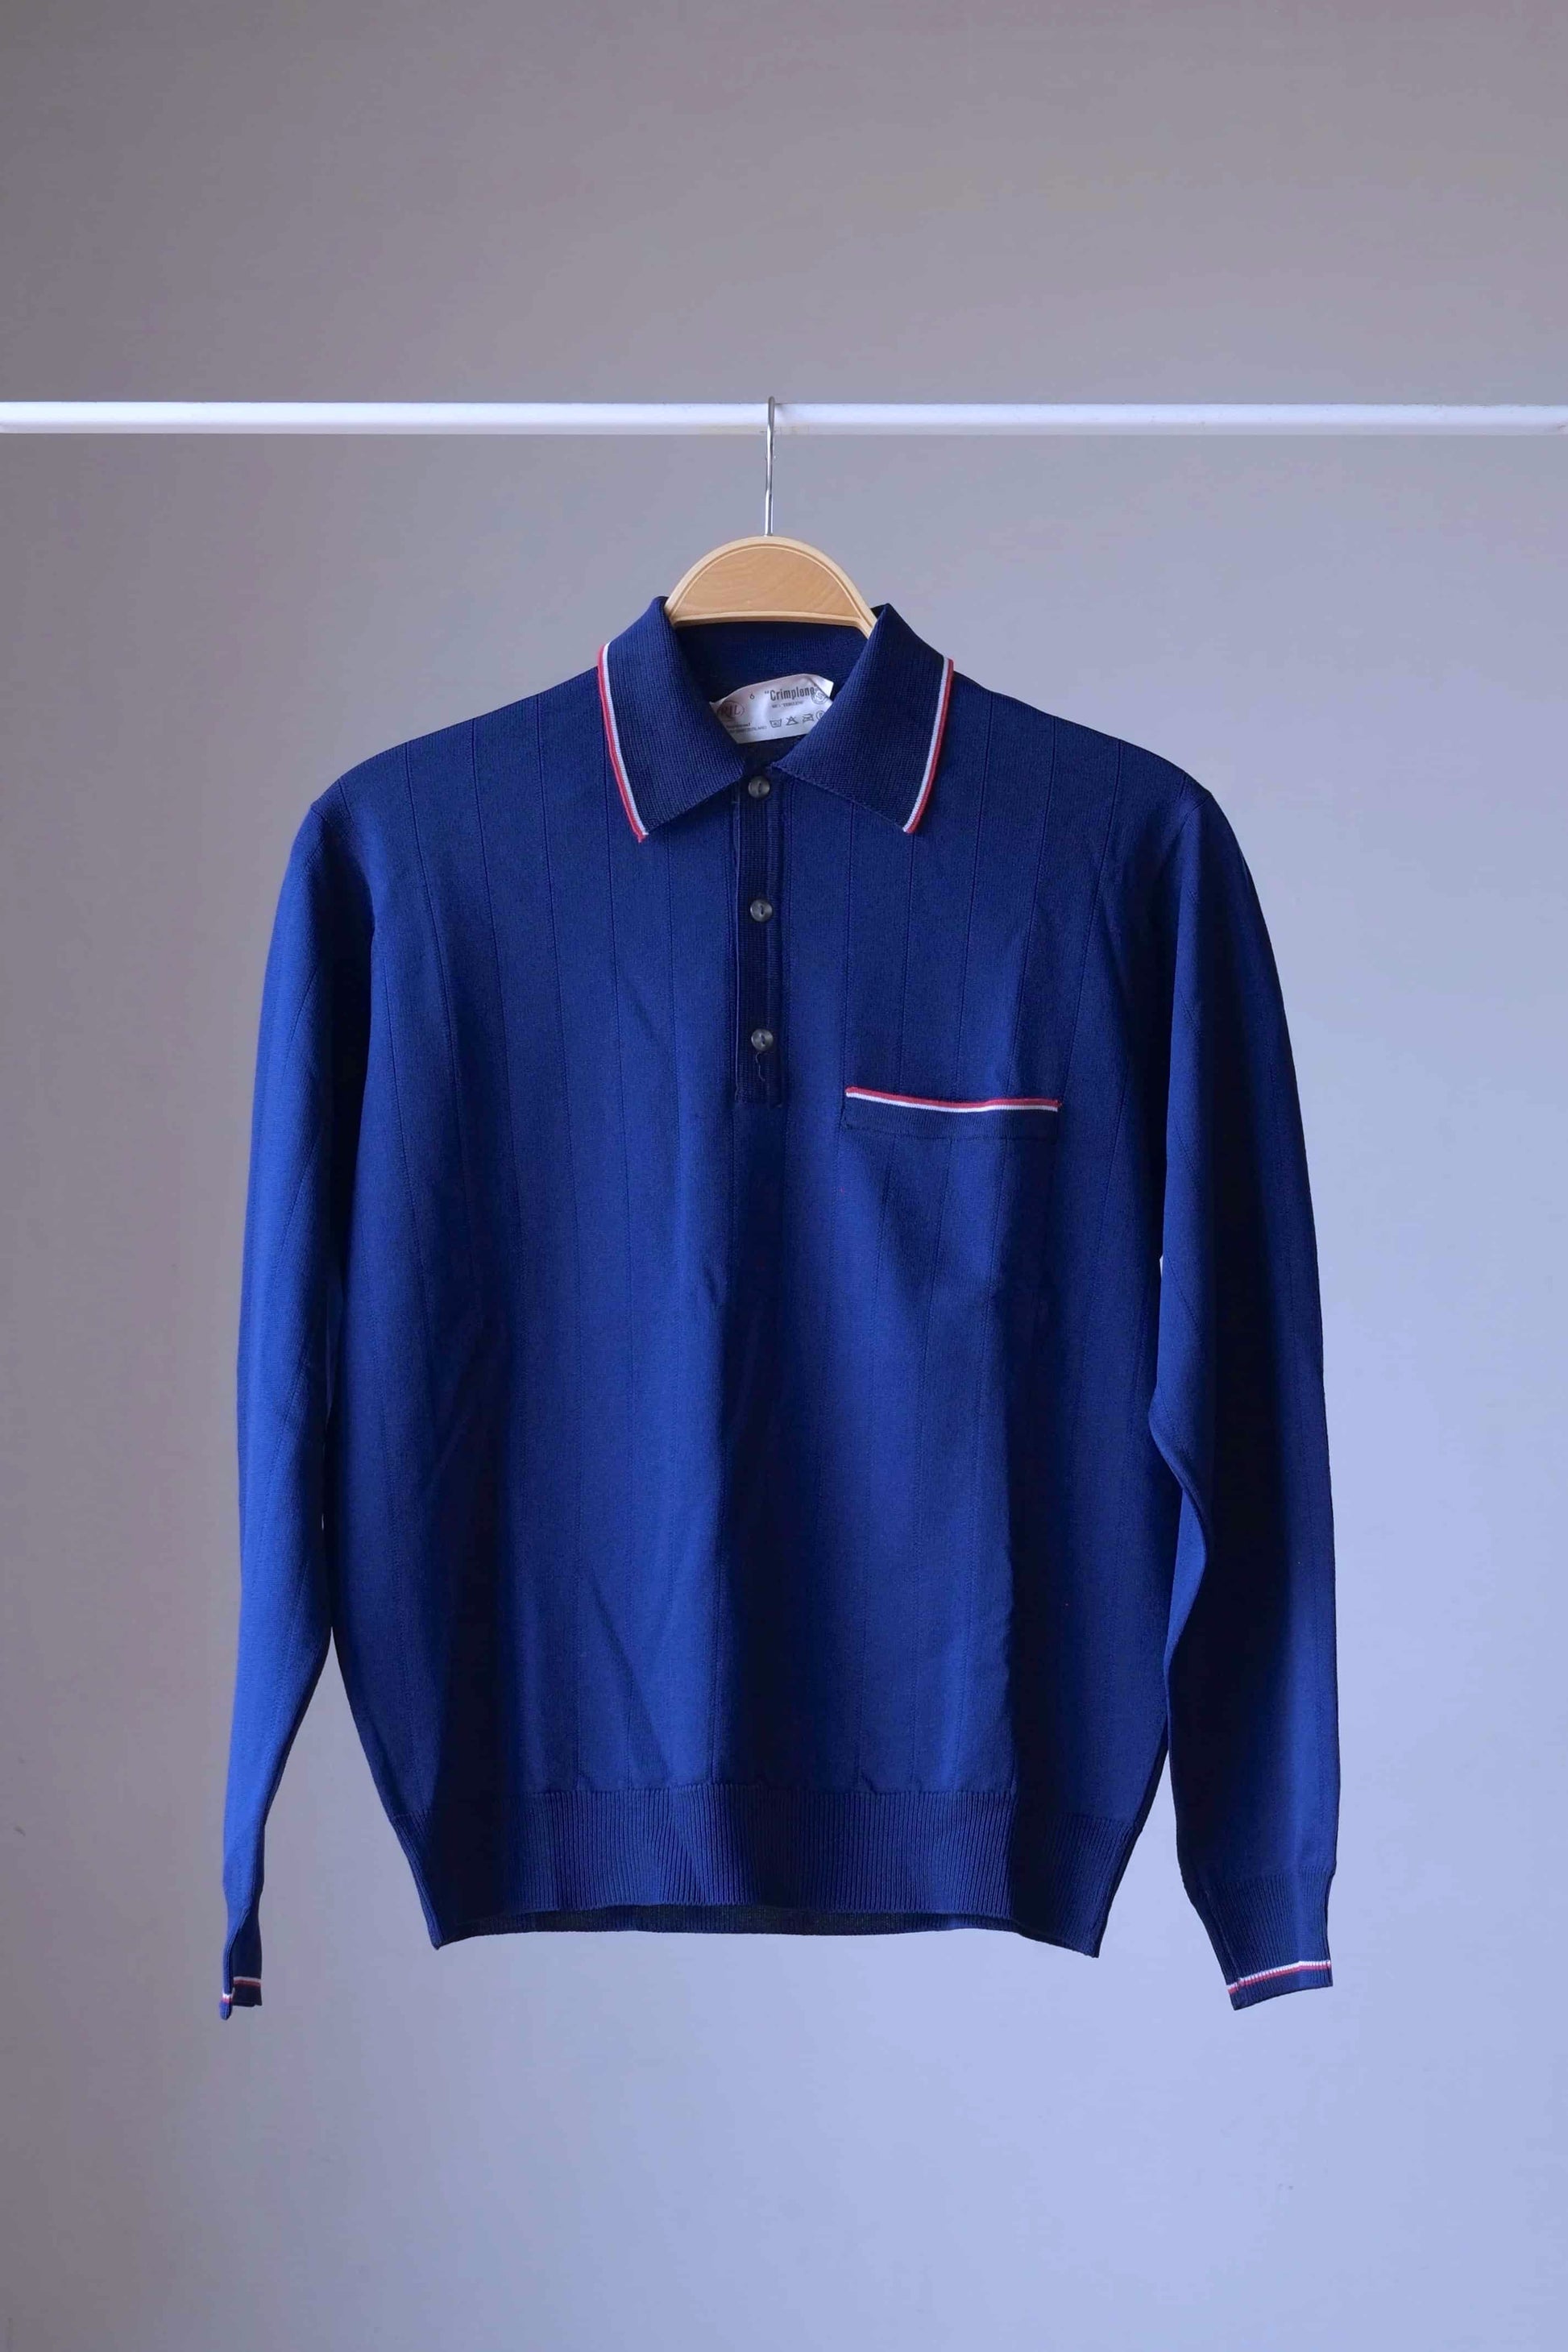  Vintage 70's Long Sleeves Knit Polo navy blue